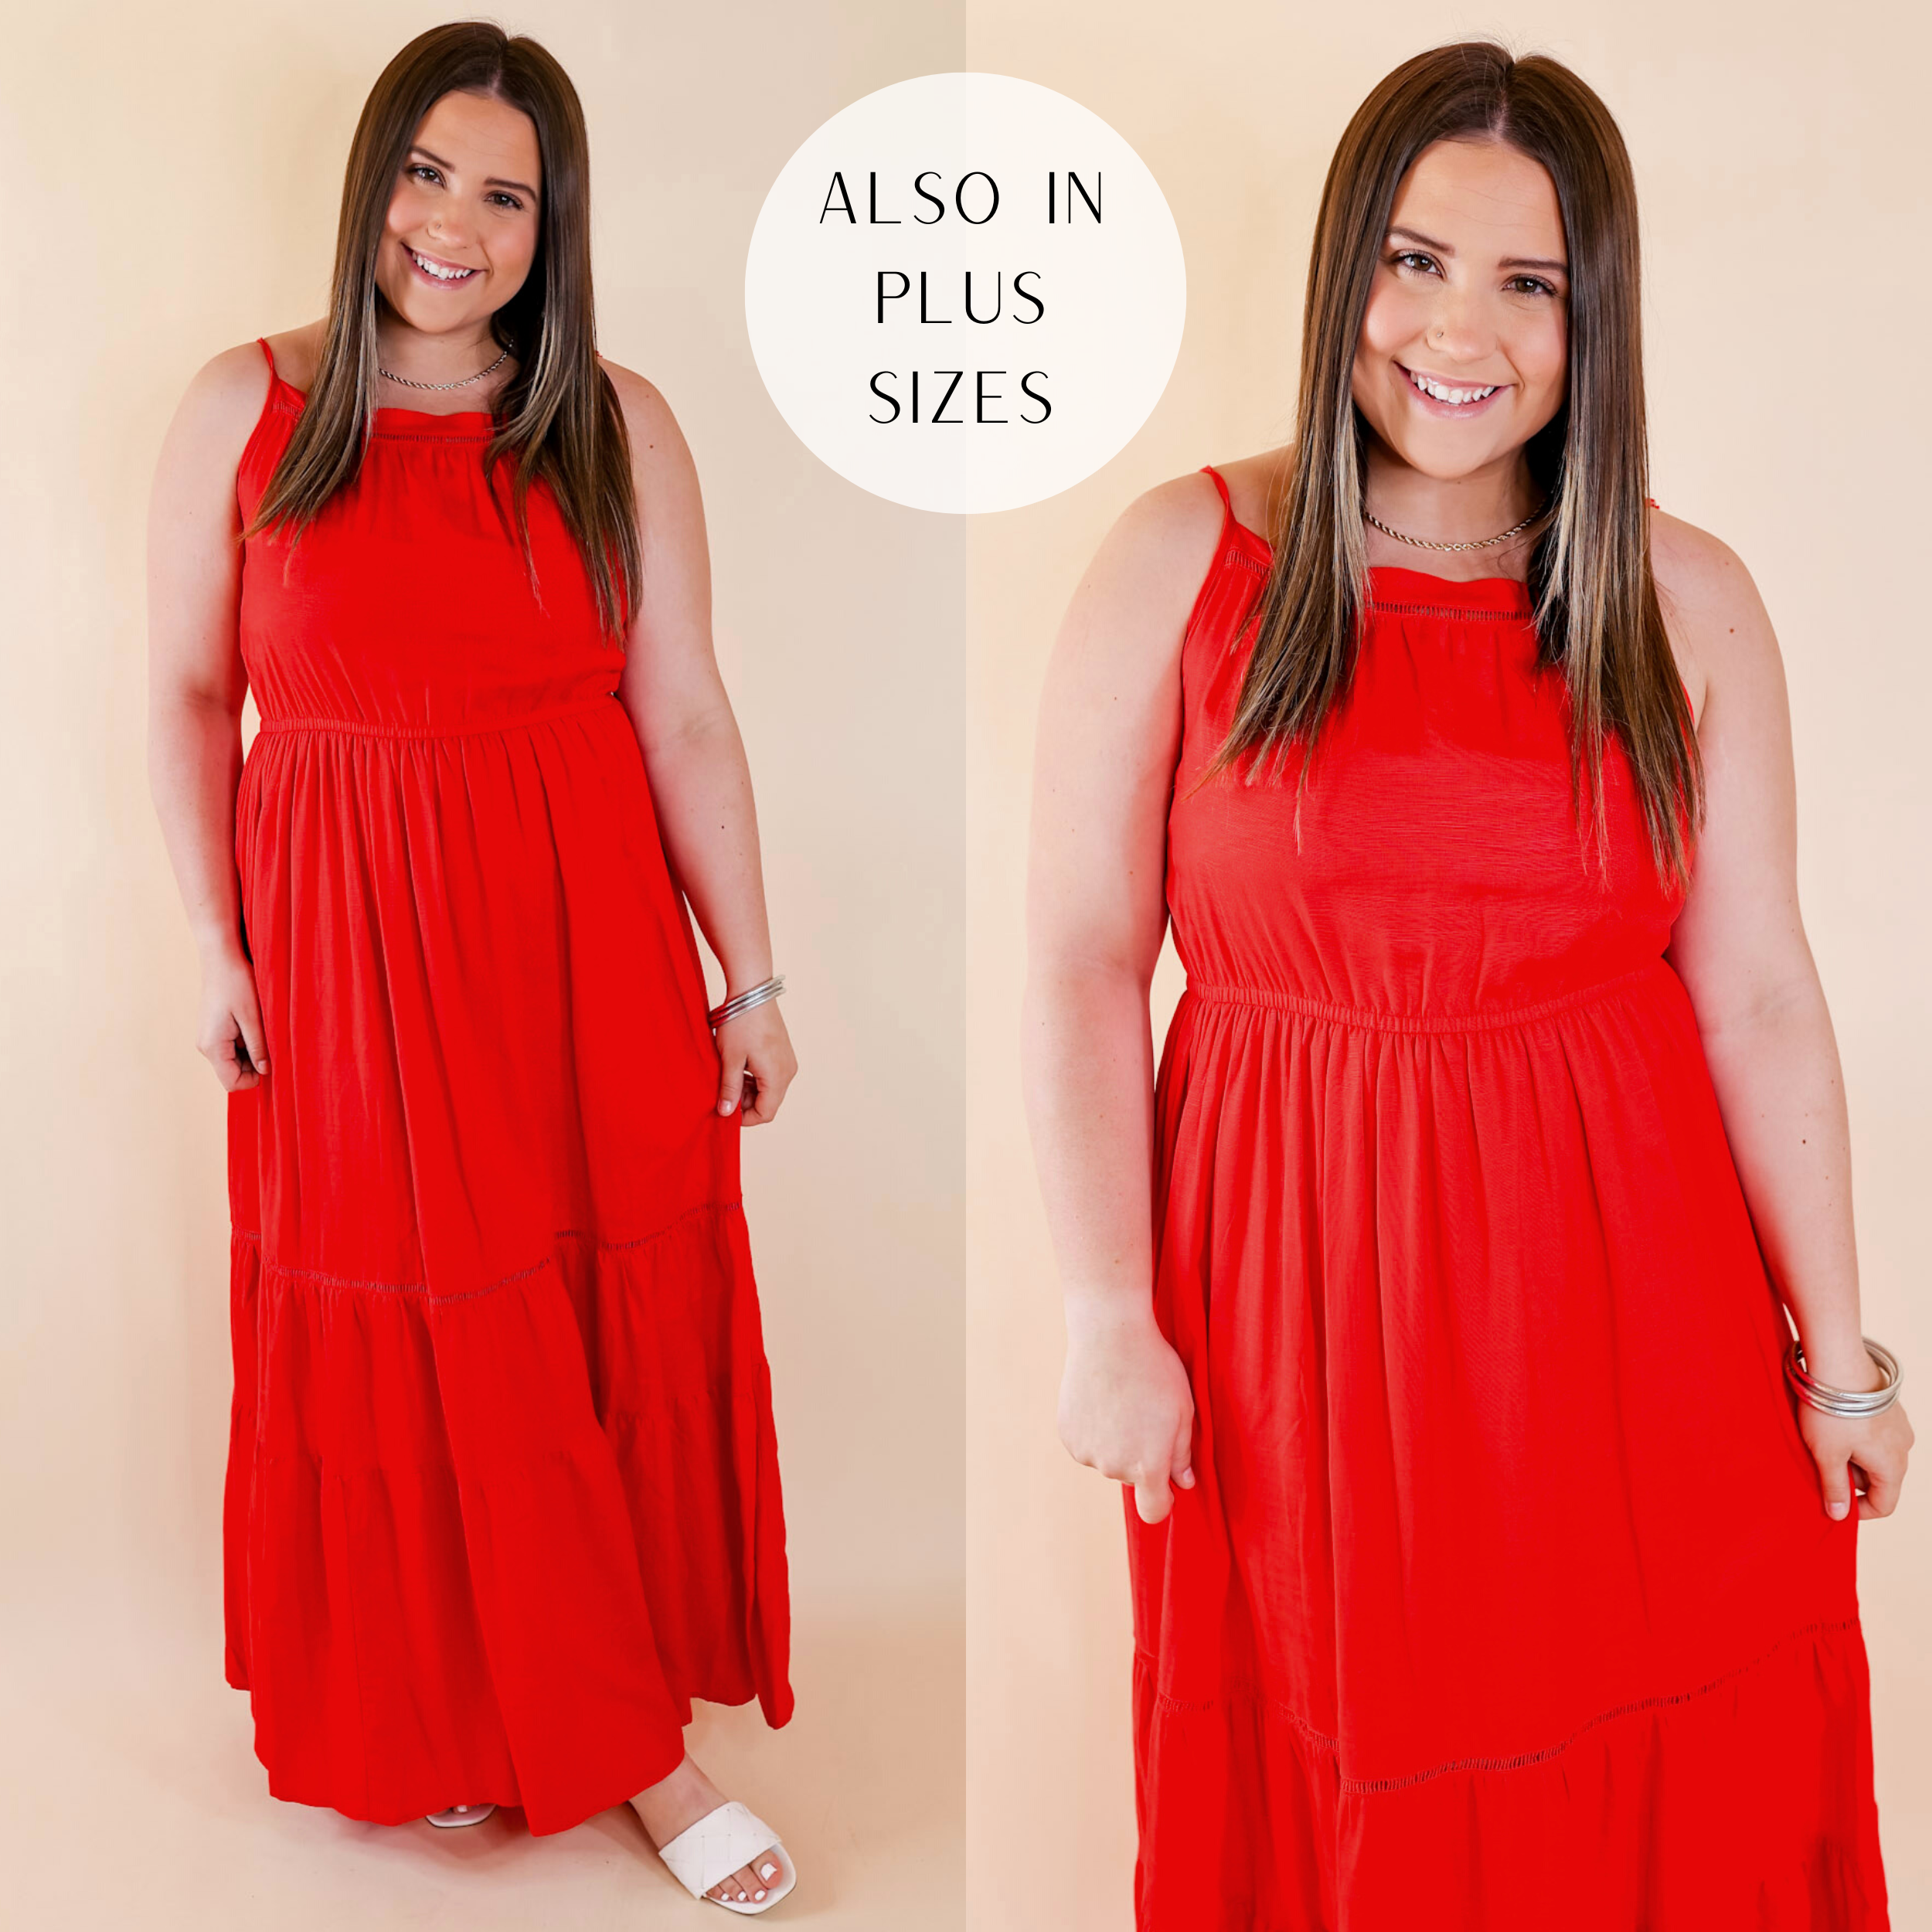 Model is wearing a red maxi dress with spaghetti straps, an elastic natural waist, and a tiered skirt. Model has it paired with white heels and silver jewelry.